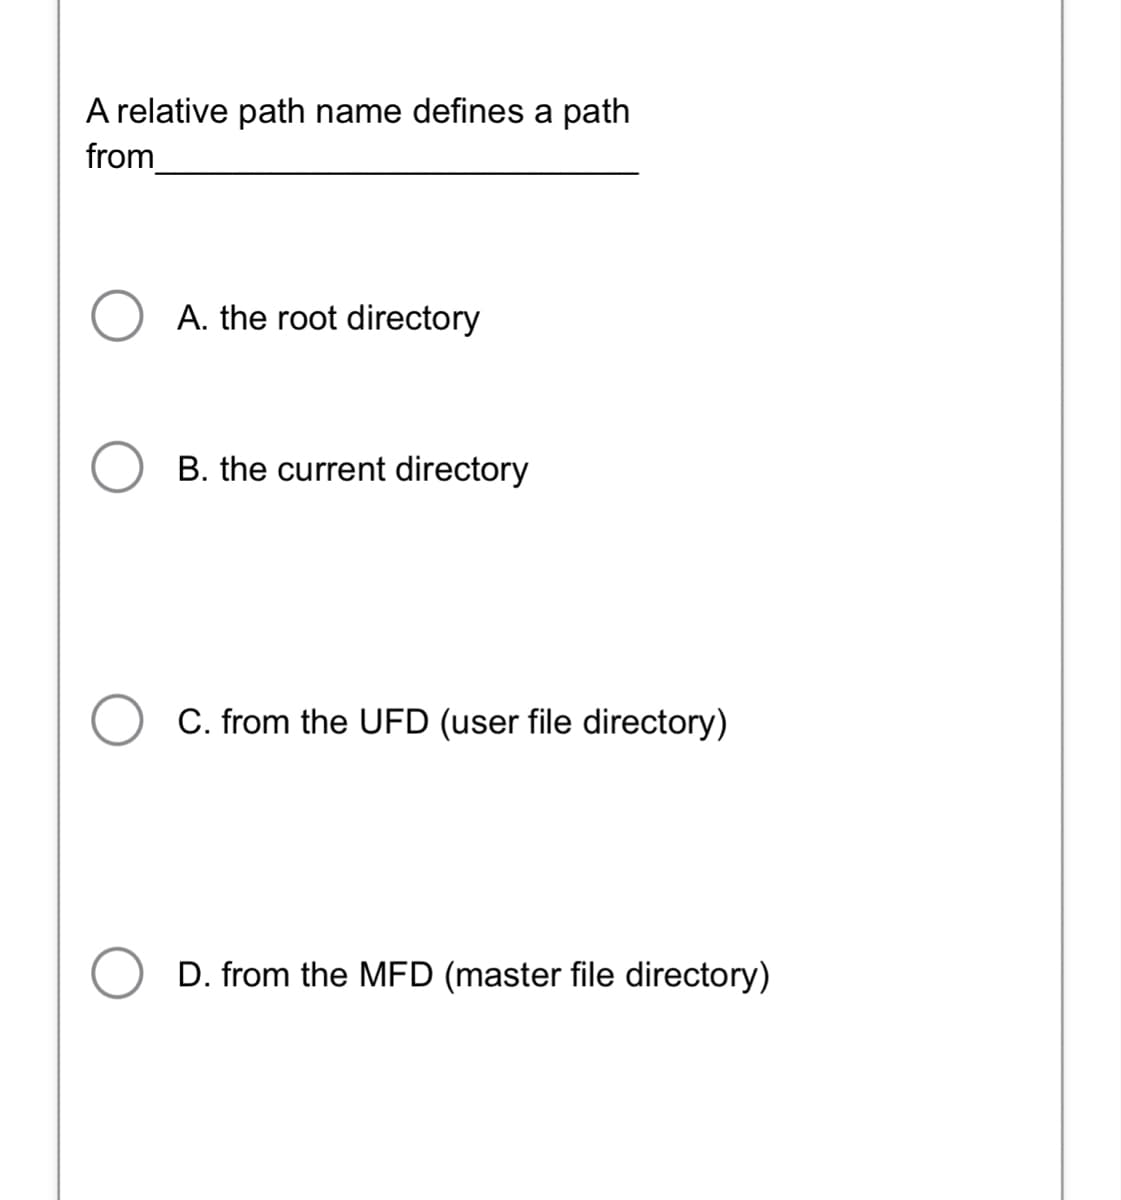 A relative path name defines a path
from
A. the root directory
B. the current directory
C. from the UFD (user file directory)
D. from the MFD (master file directory)